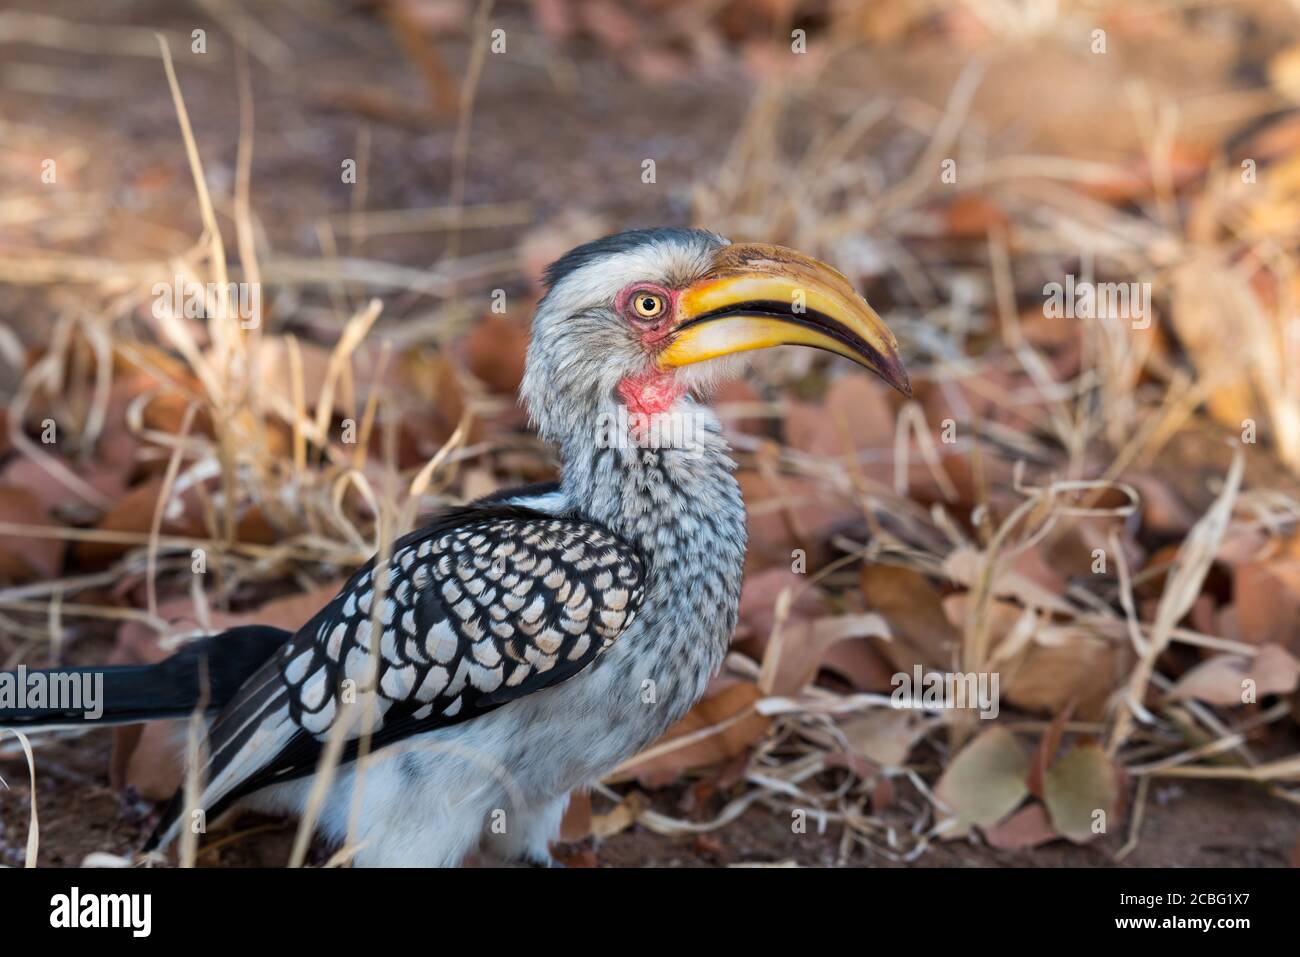 Yellow billed hornbill perched on the ground between grass and mopane leaves and relaxing staring around Stock Photo